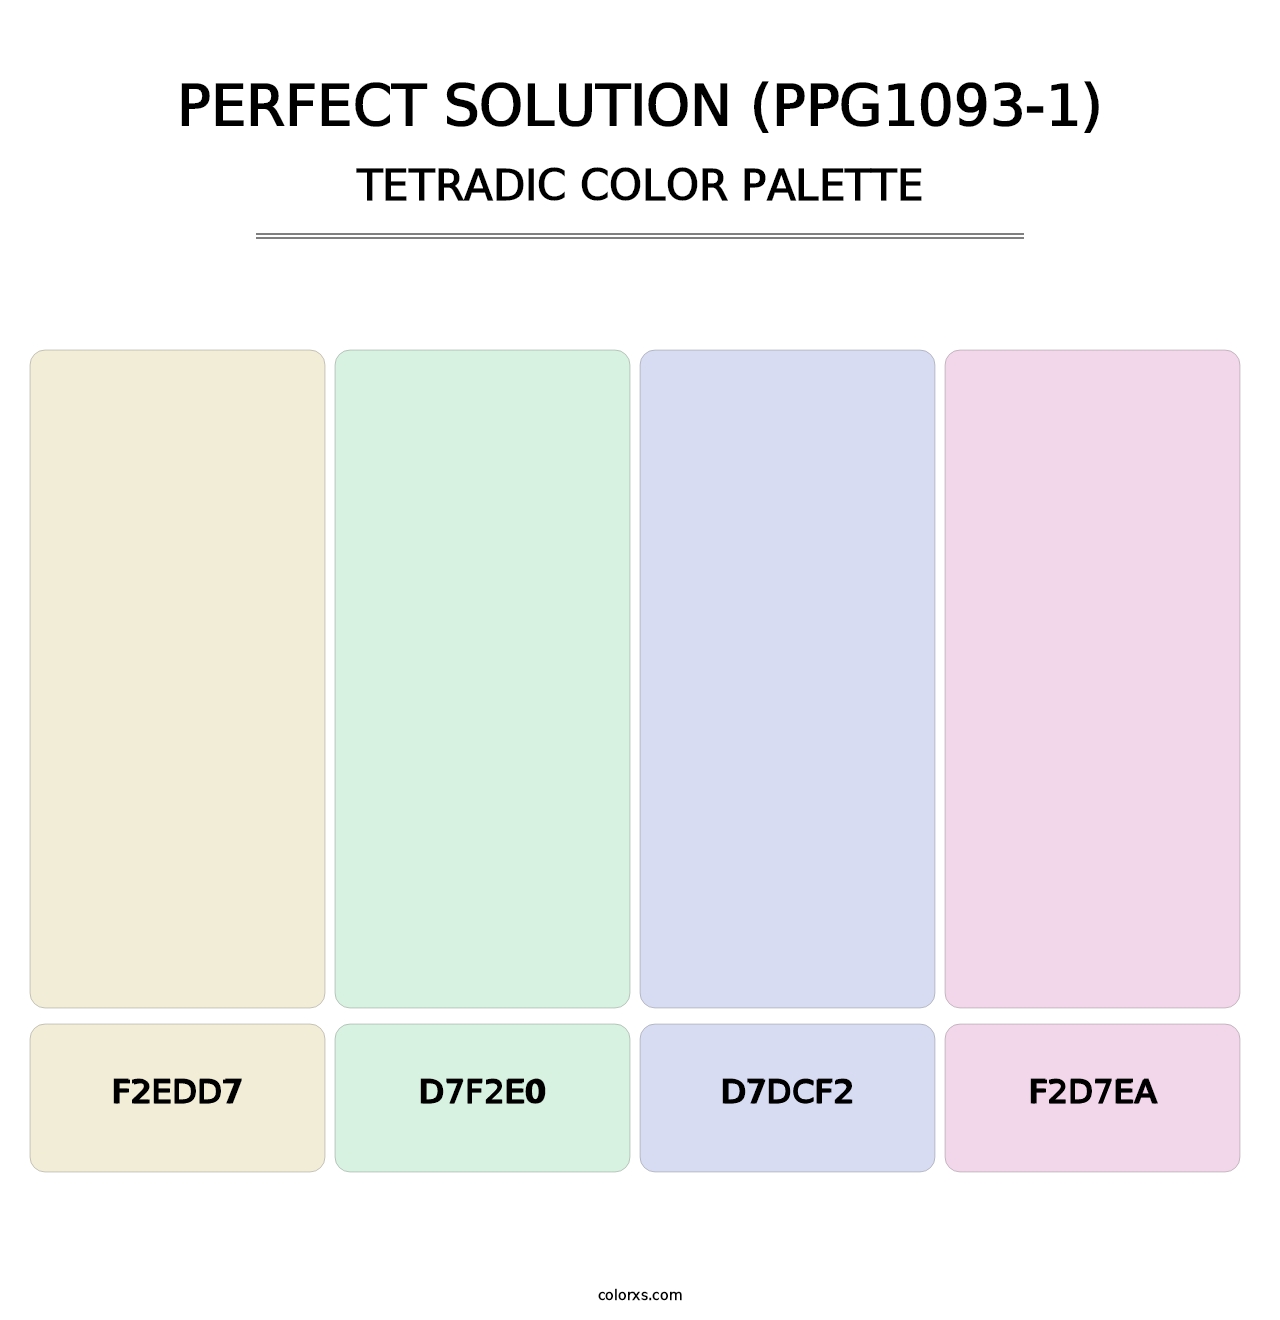 Perfect Solution (PPG1093-1) - Tetradic Color Palette